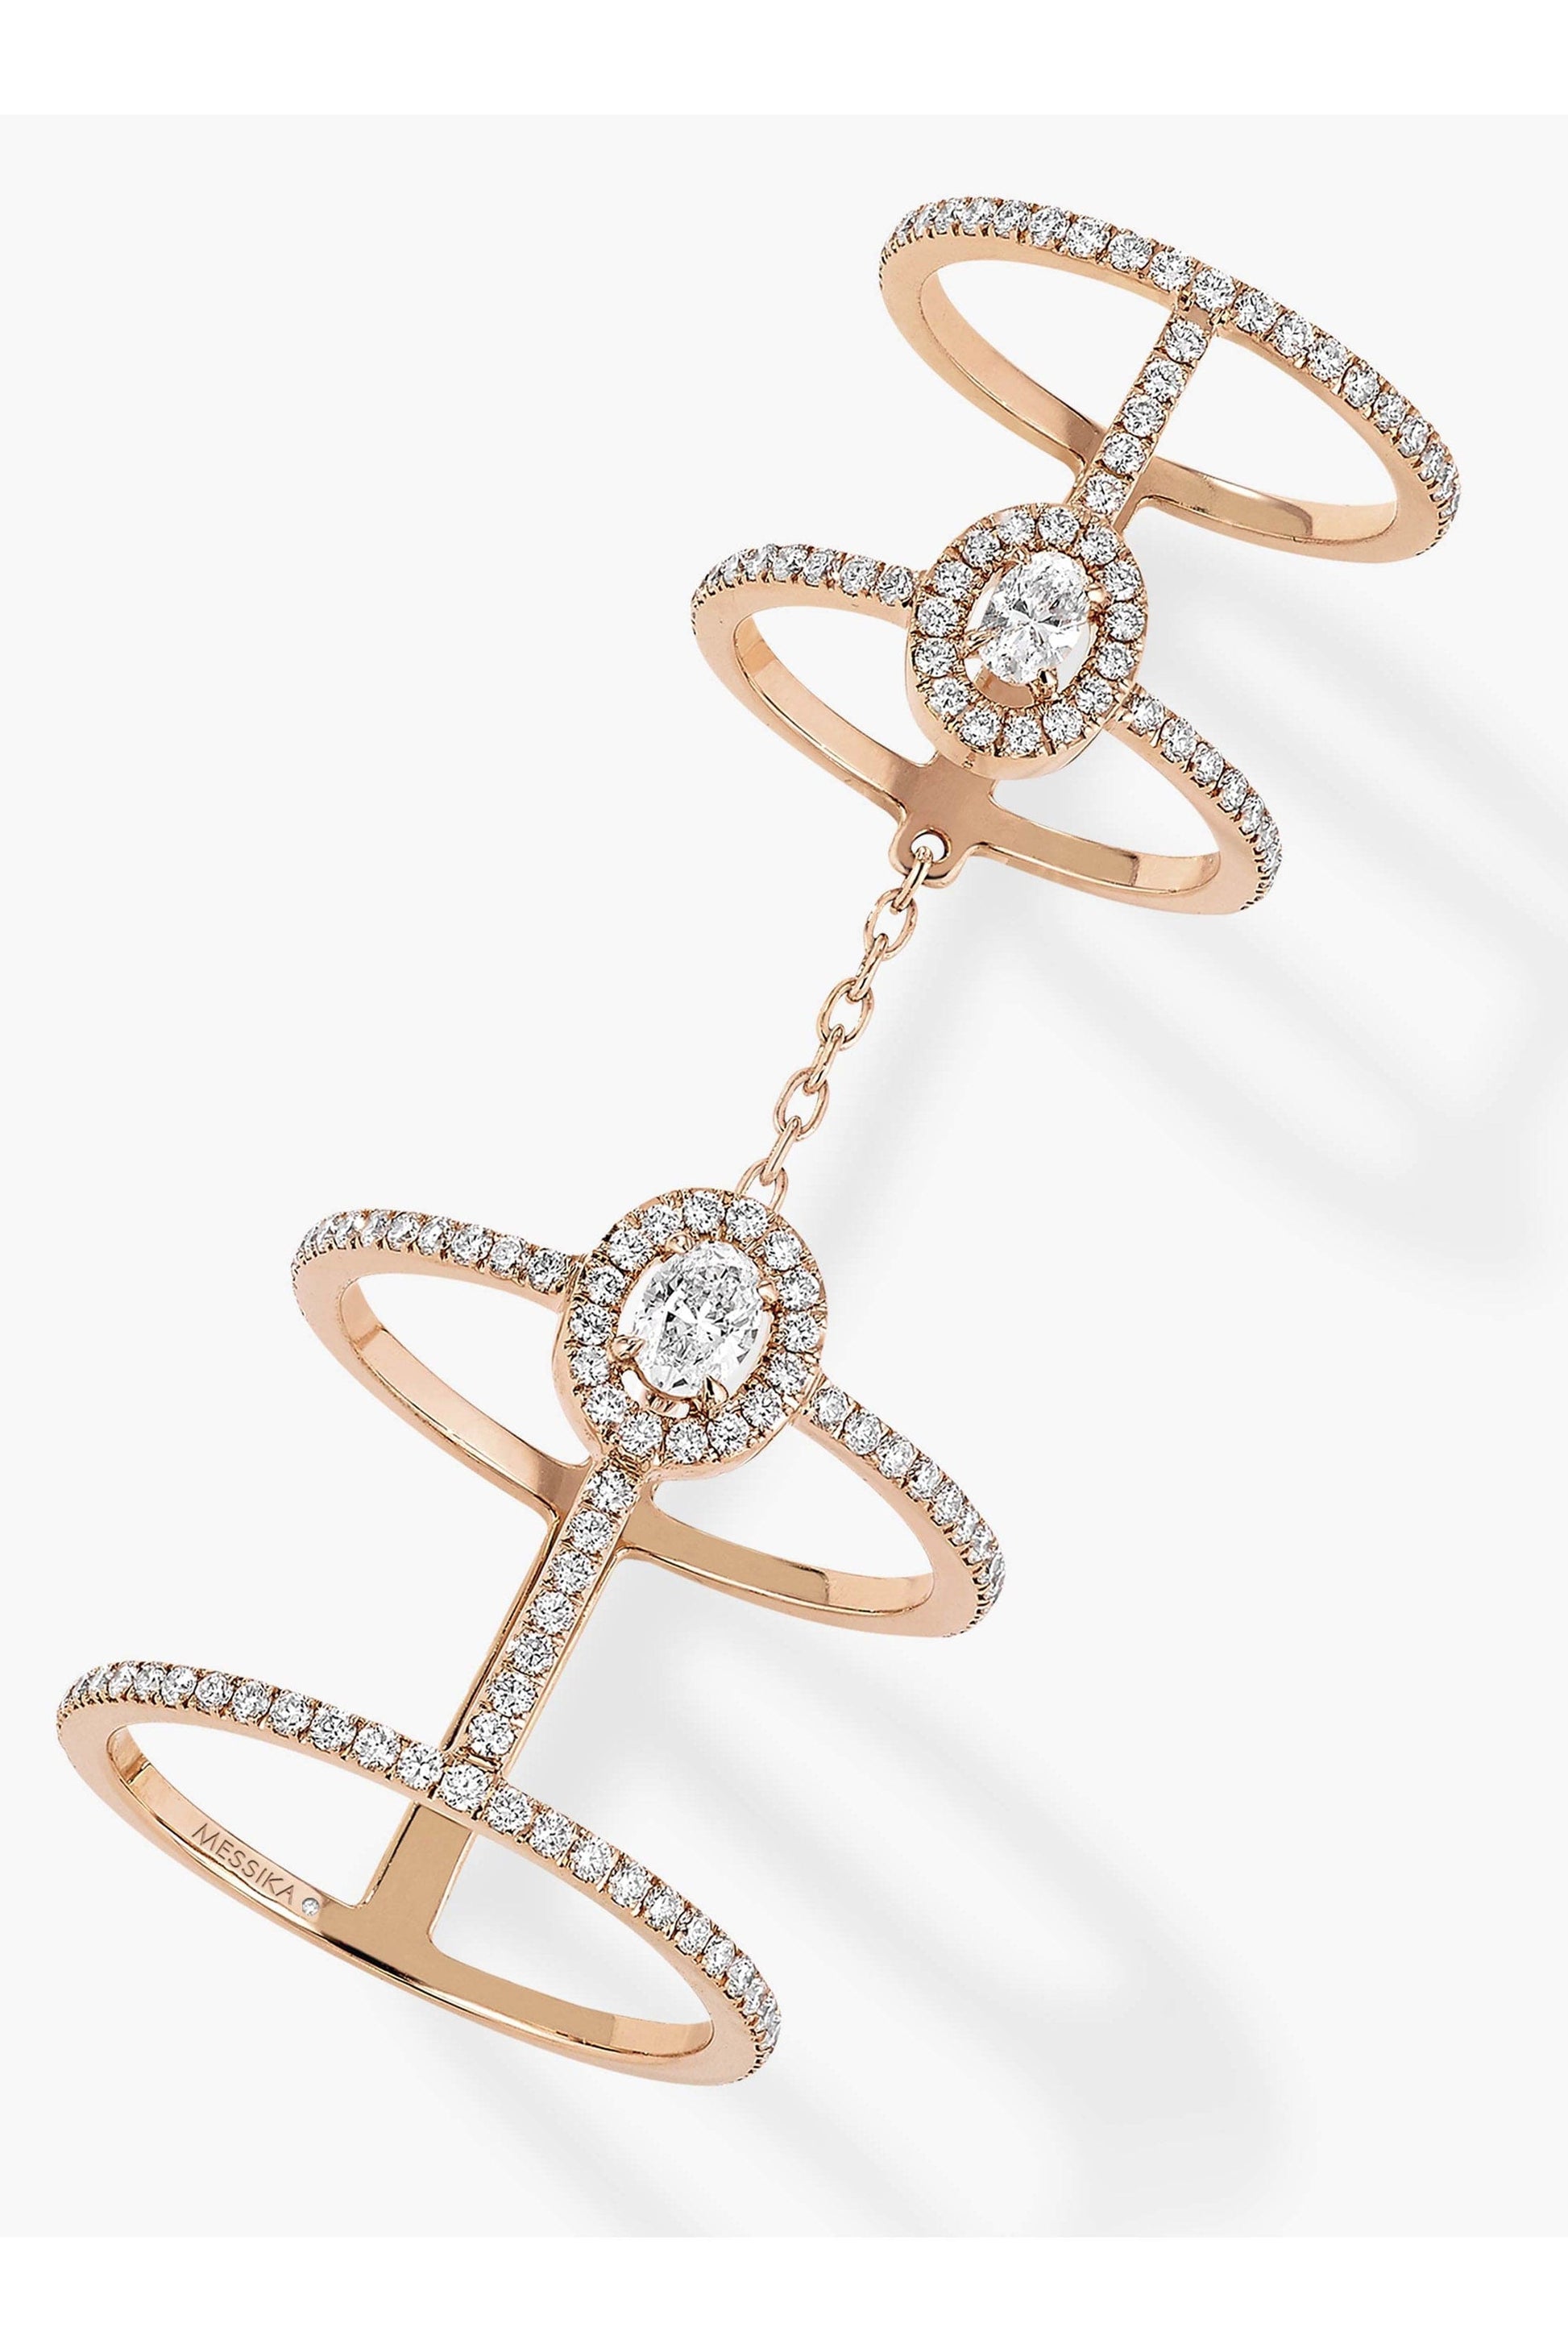 MESSIKA-Glam'Azone Double Pave Diamond Ring-